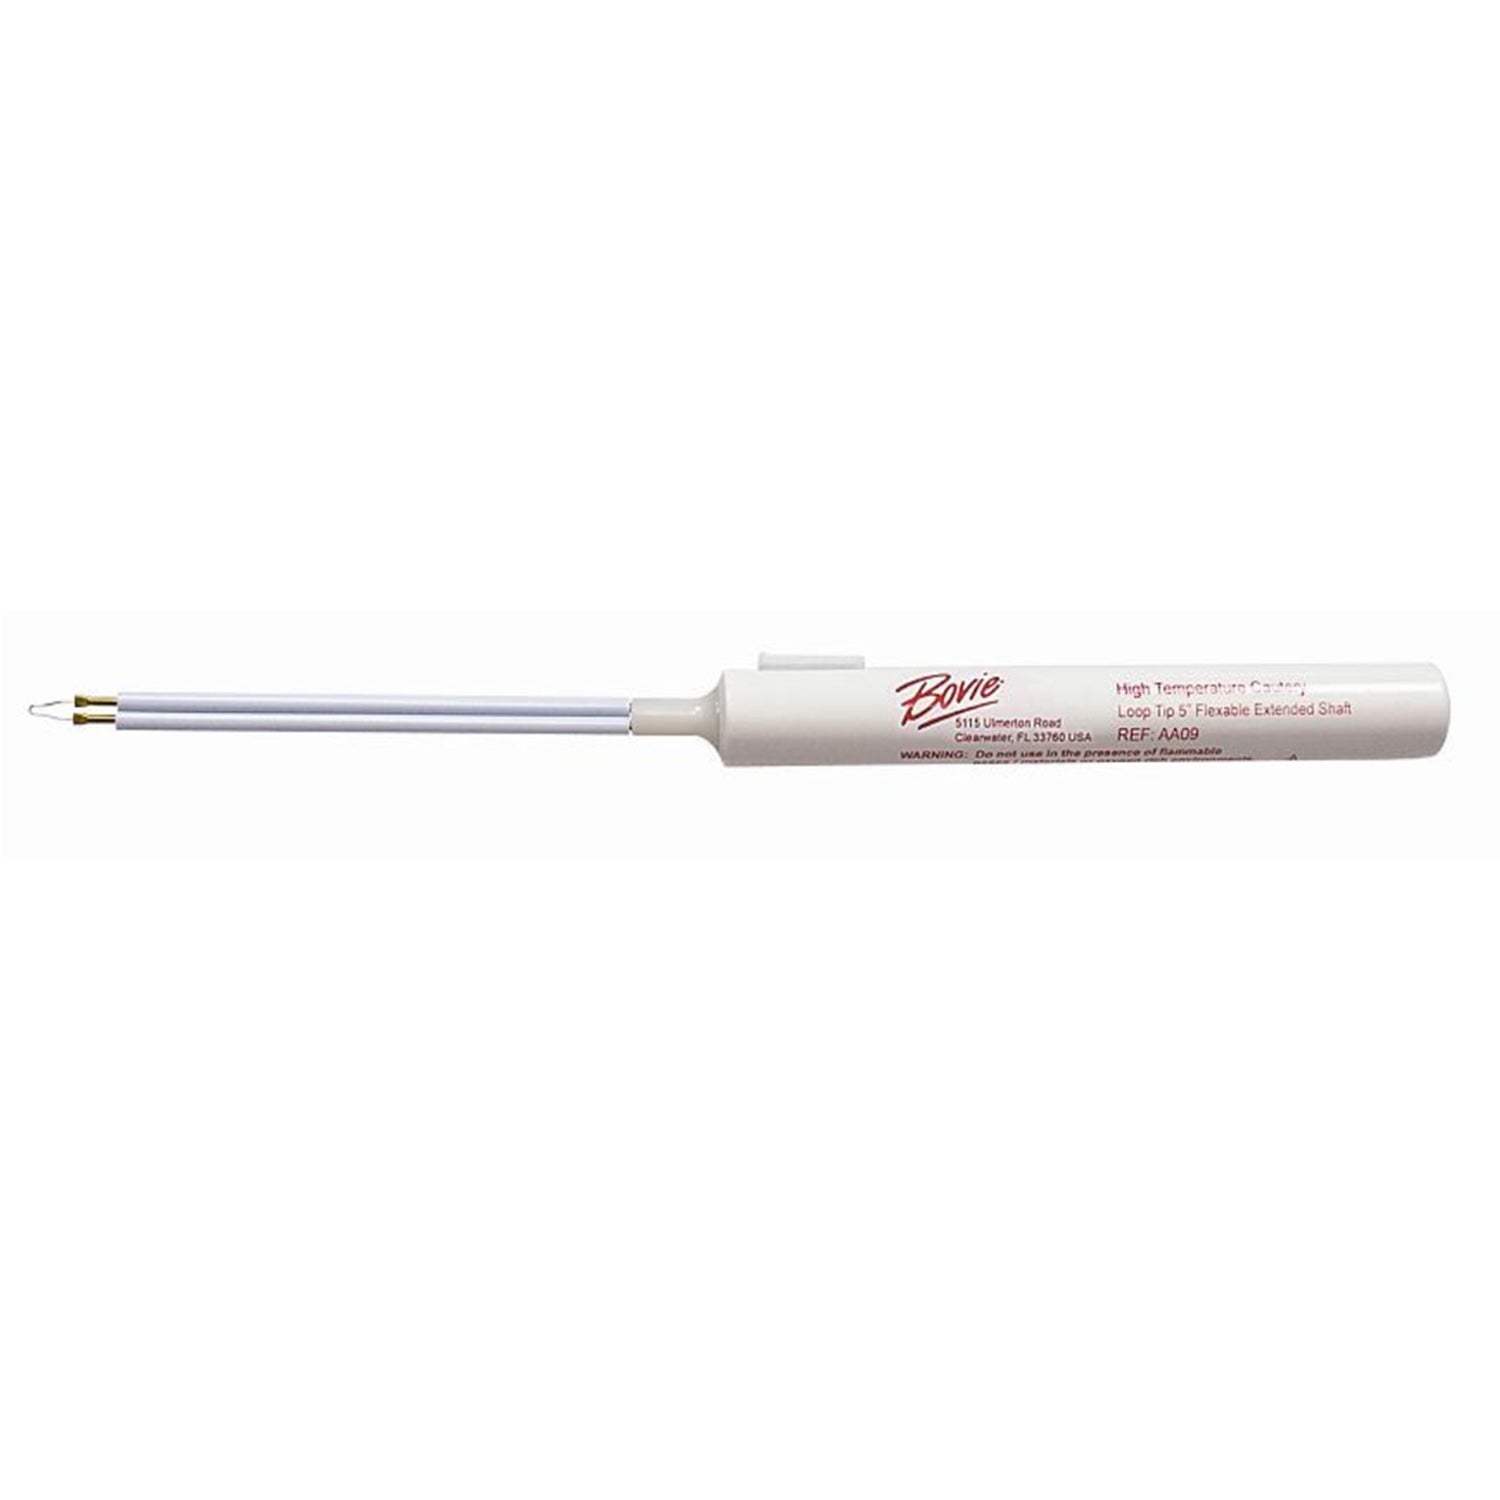 Bovie High Temperature Extended 5" Shaft Loop Tip Cautery | 2200°F/1204°C | Pack of 10